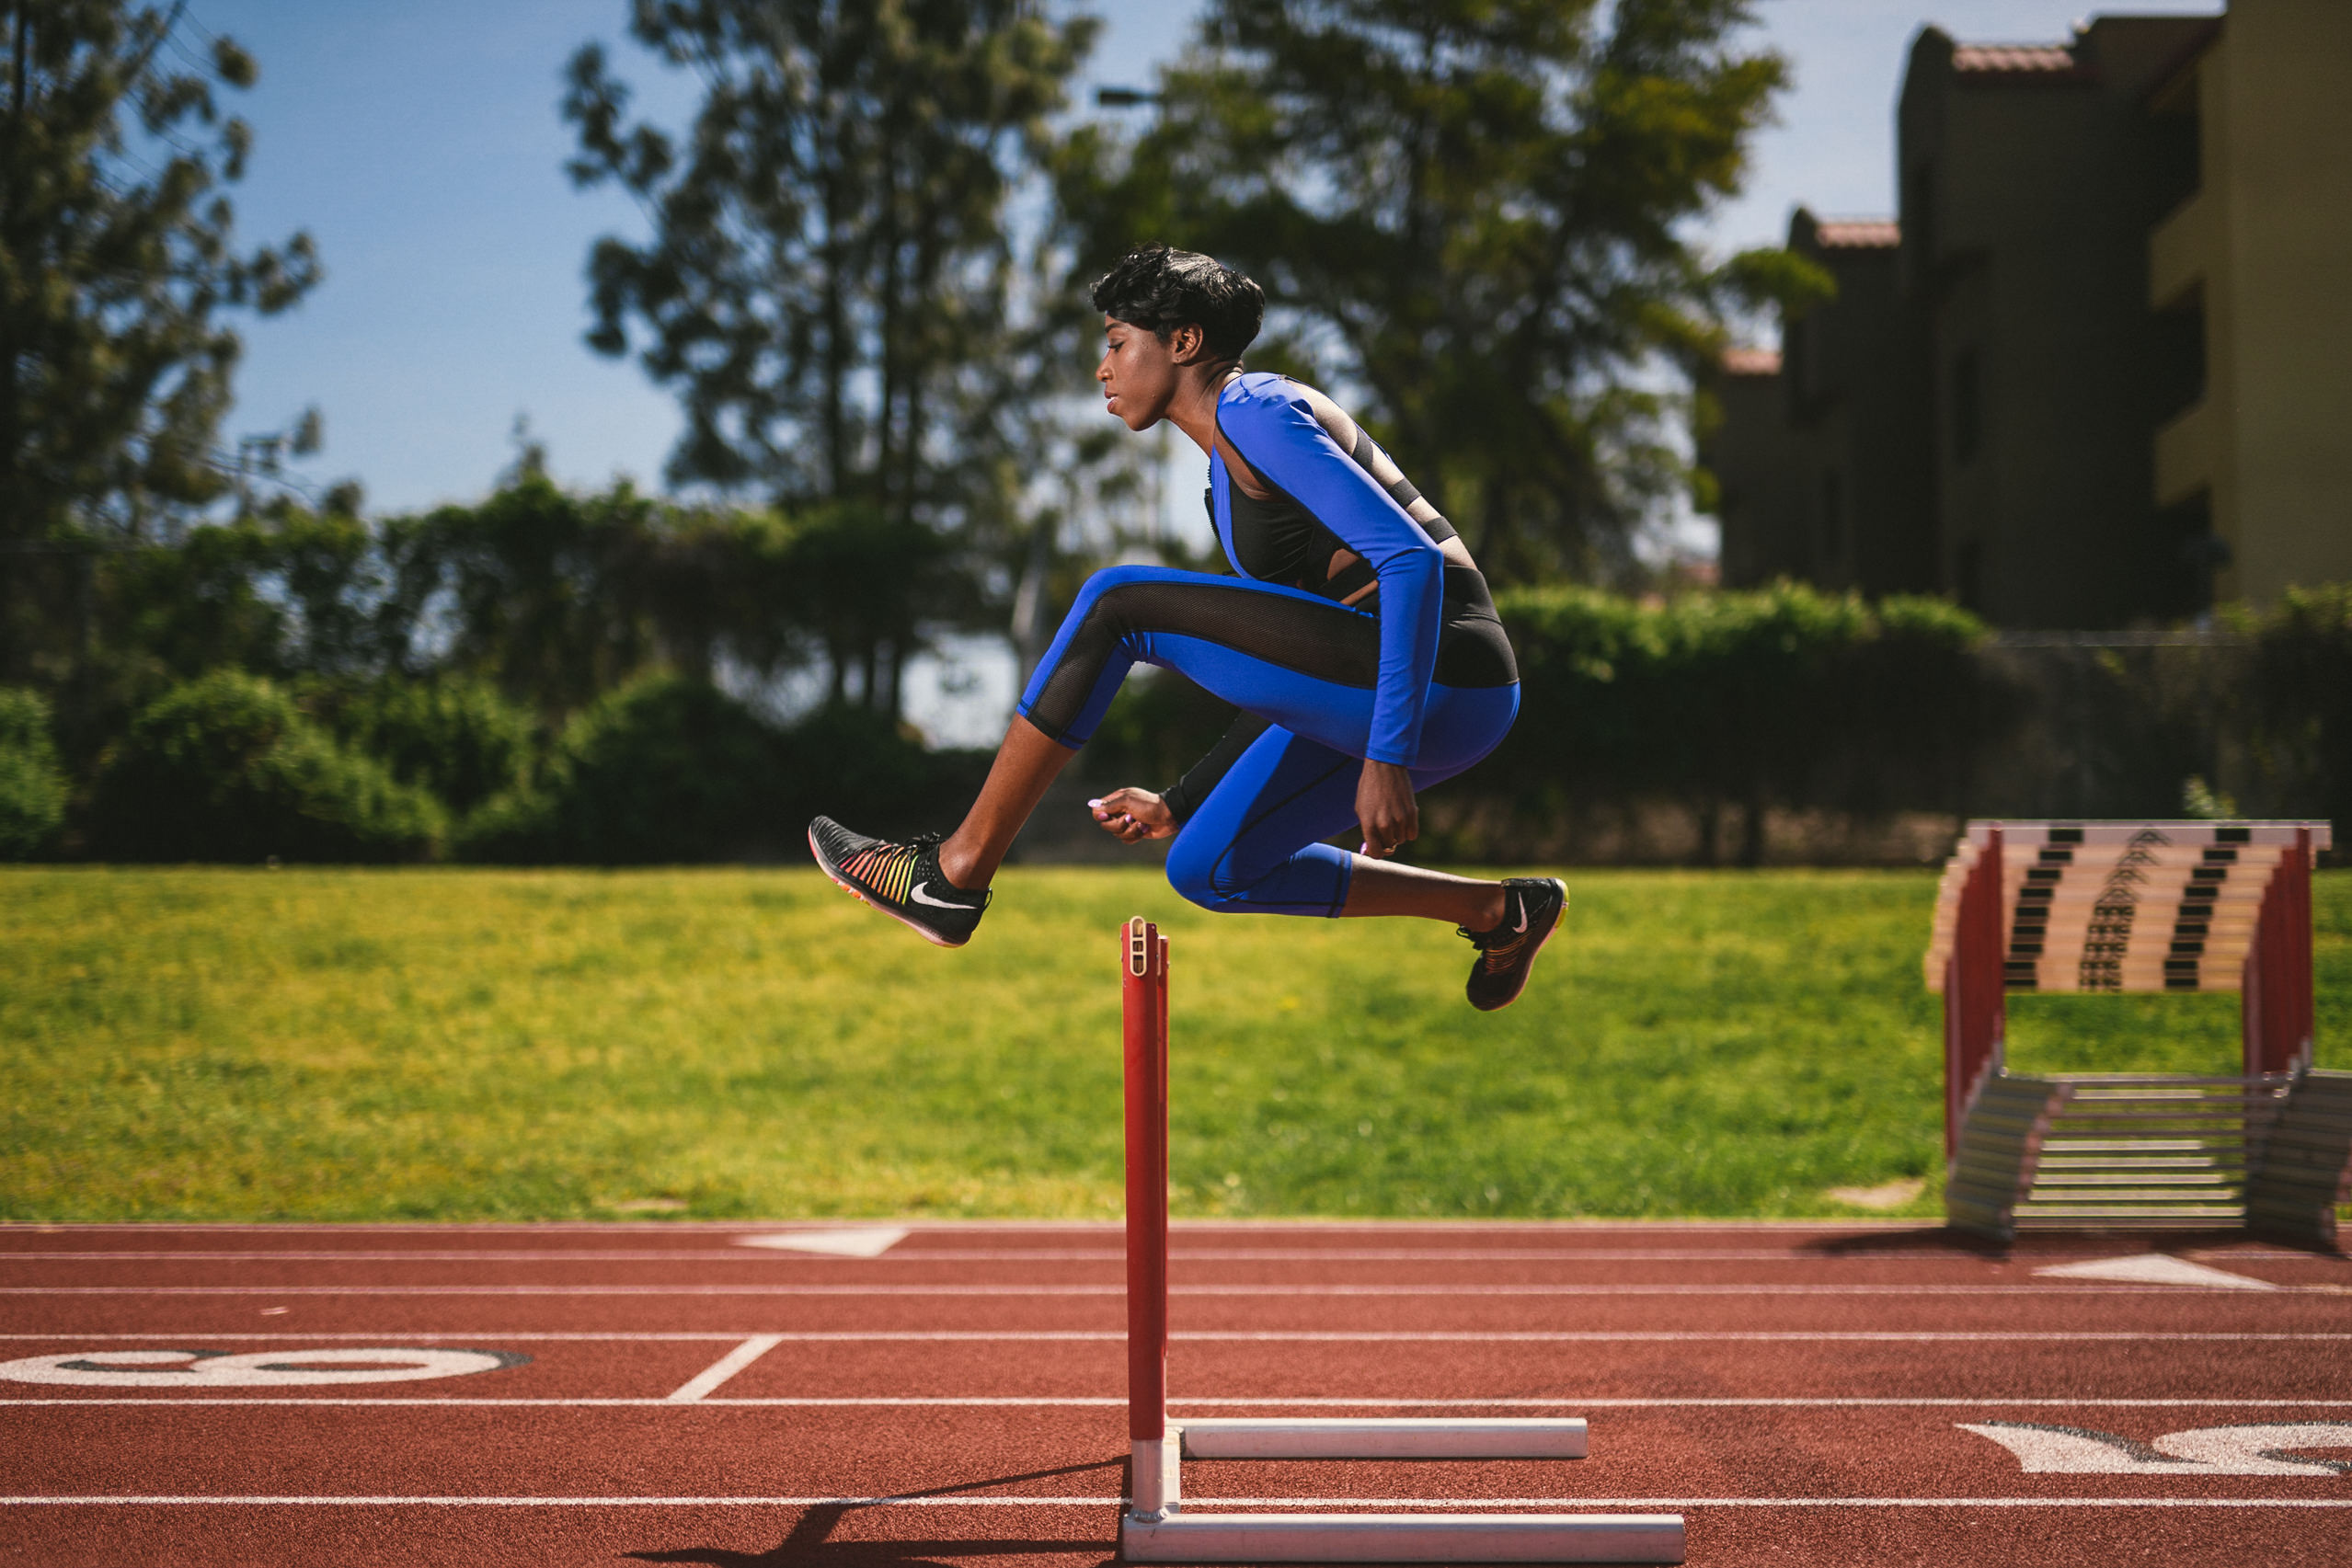 Professional Photography Services to elevate your brand C&I Studios Creative Marketing Kinetix 365 Side view of a woman on a track field in track outfit jumping a hurdle